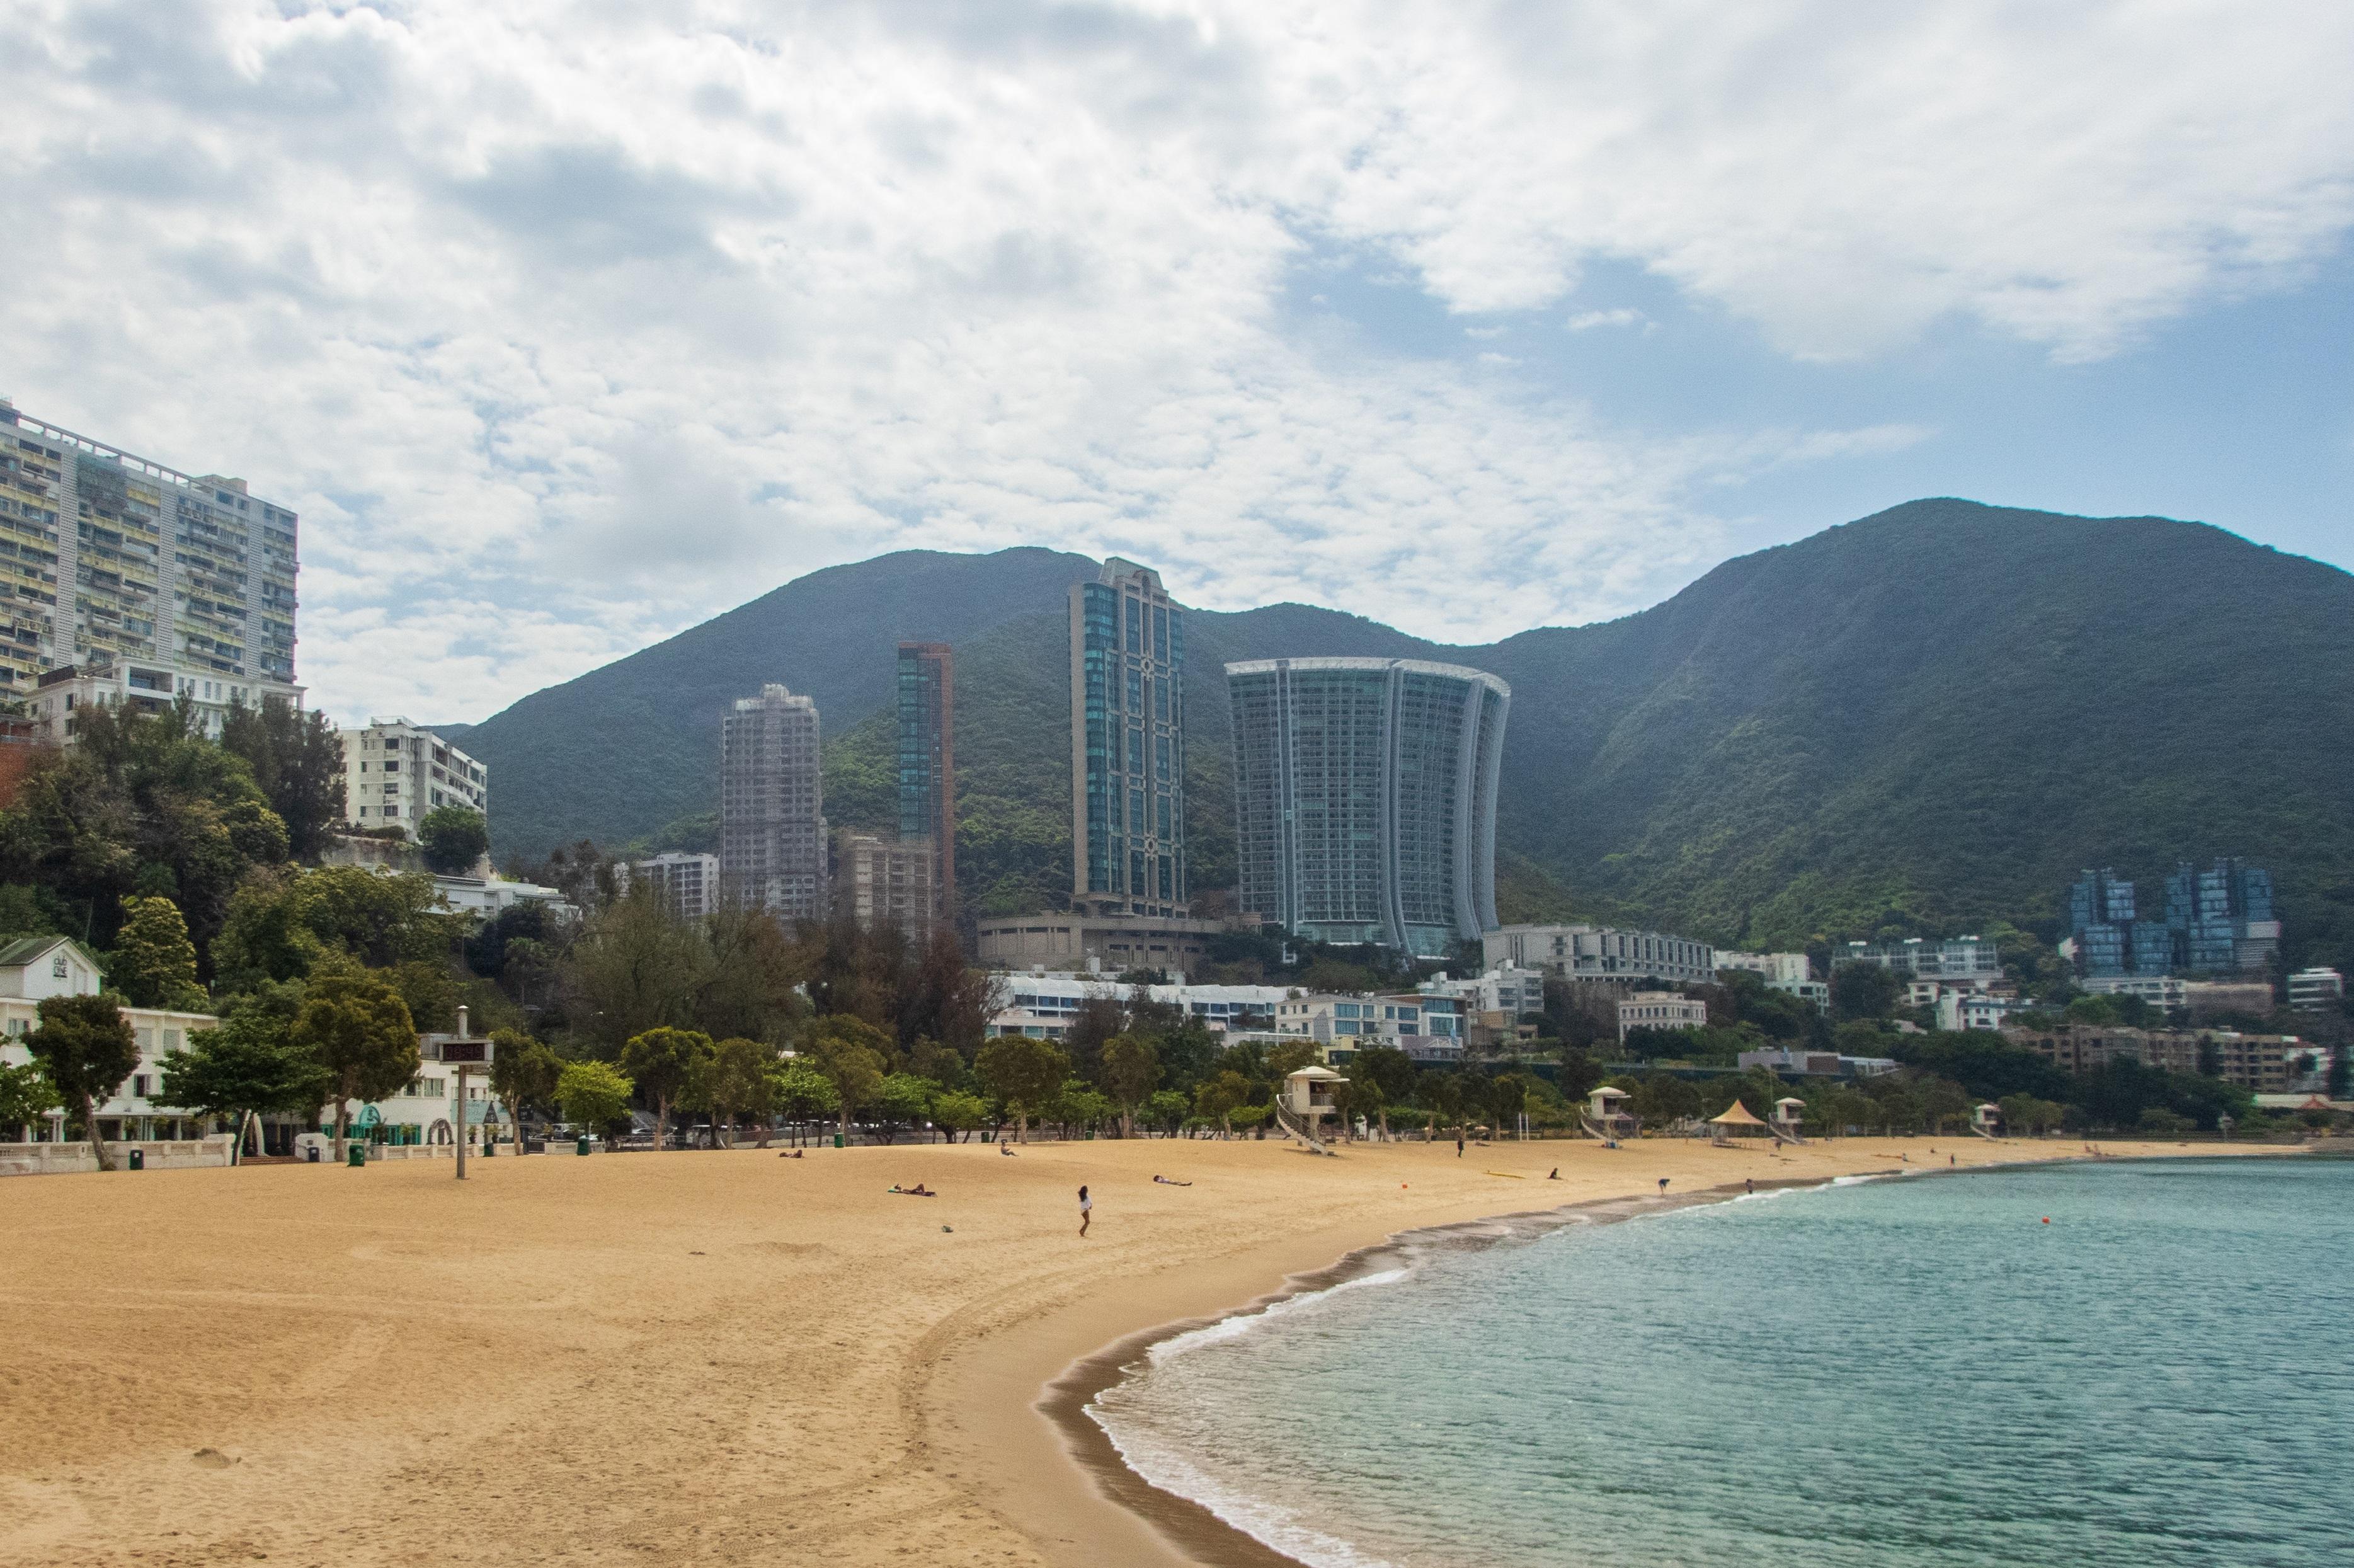 The 2022 report on beach water quality shows that all Hong Kong gazetted beaches have fully met the bacteriological Water Quality Objective for 13 consecutive years. Photo shows the Repulse Bay Beach in Southern District which has had a "Good" water quality annual ranking since 1990.